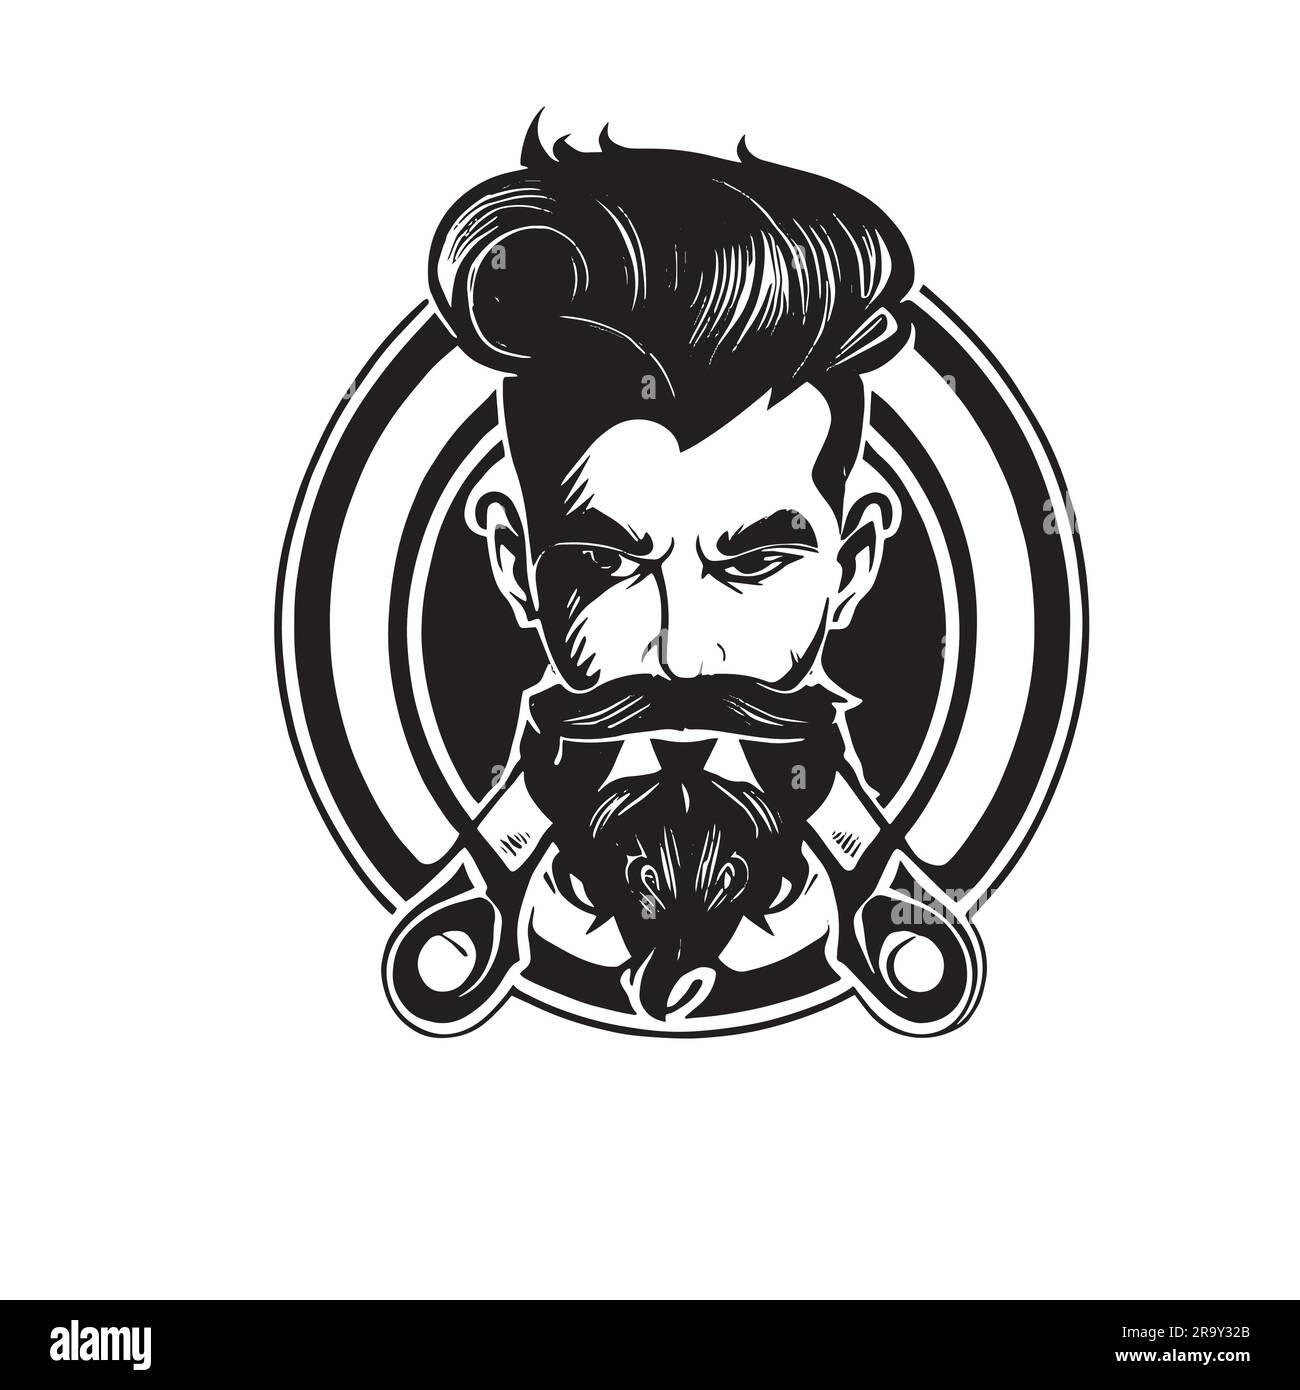 barber logo in black color on a white background. Retro style illustration of a bearded hipster man with moustache and beard viewed from front. Stock Vector